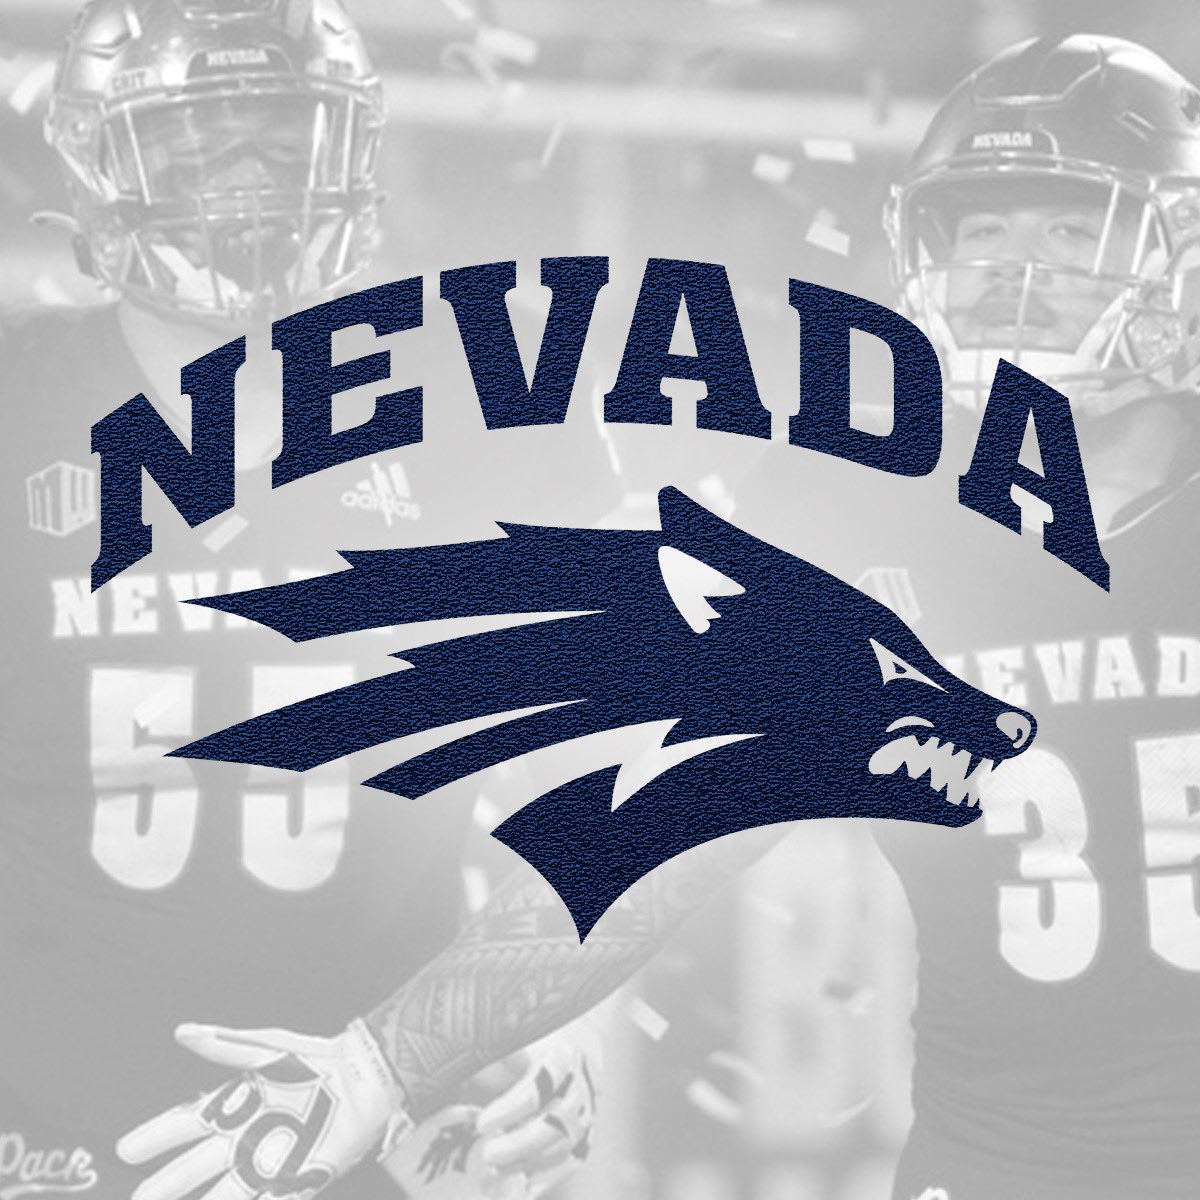 Thank you to @CoachLynch from @NevadaFootball for stopping by Folsom today. We appreciate you! #GoBullDogs @CoachTravisFHS @coach_angel3 @coachtc43 @CoachIrsik1